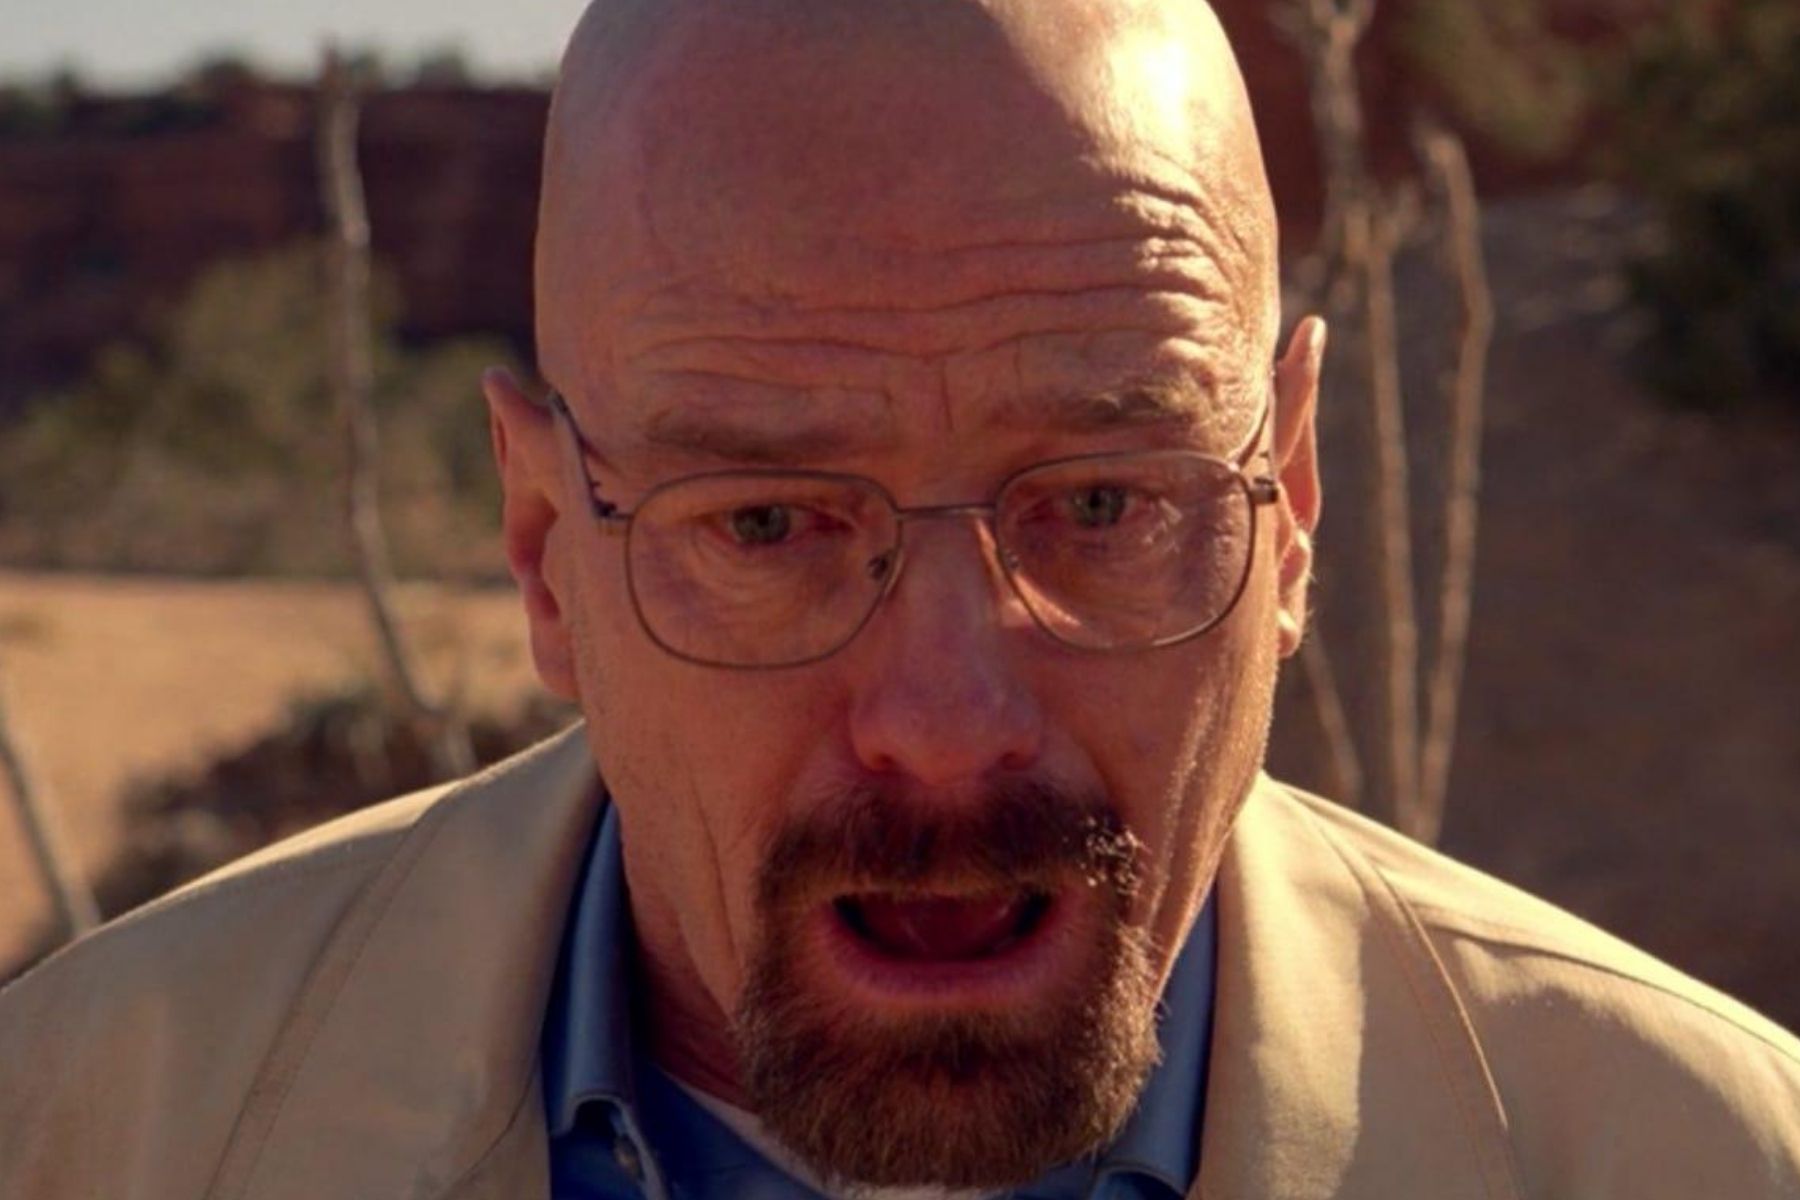 Walter White's tighty whities auctioned off